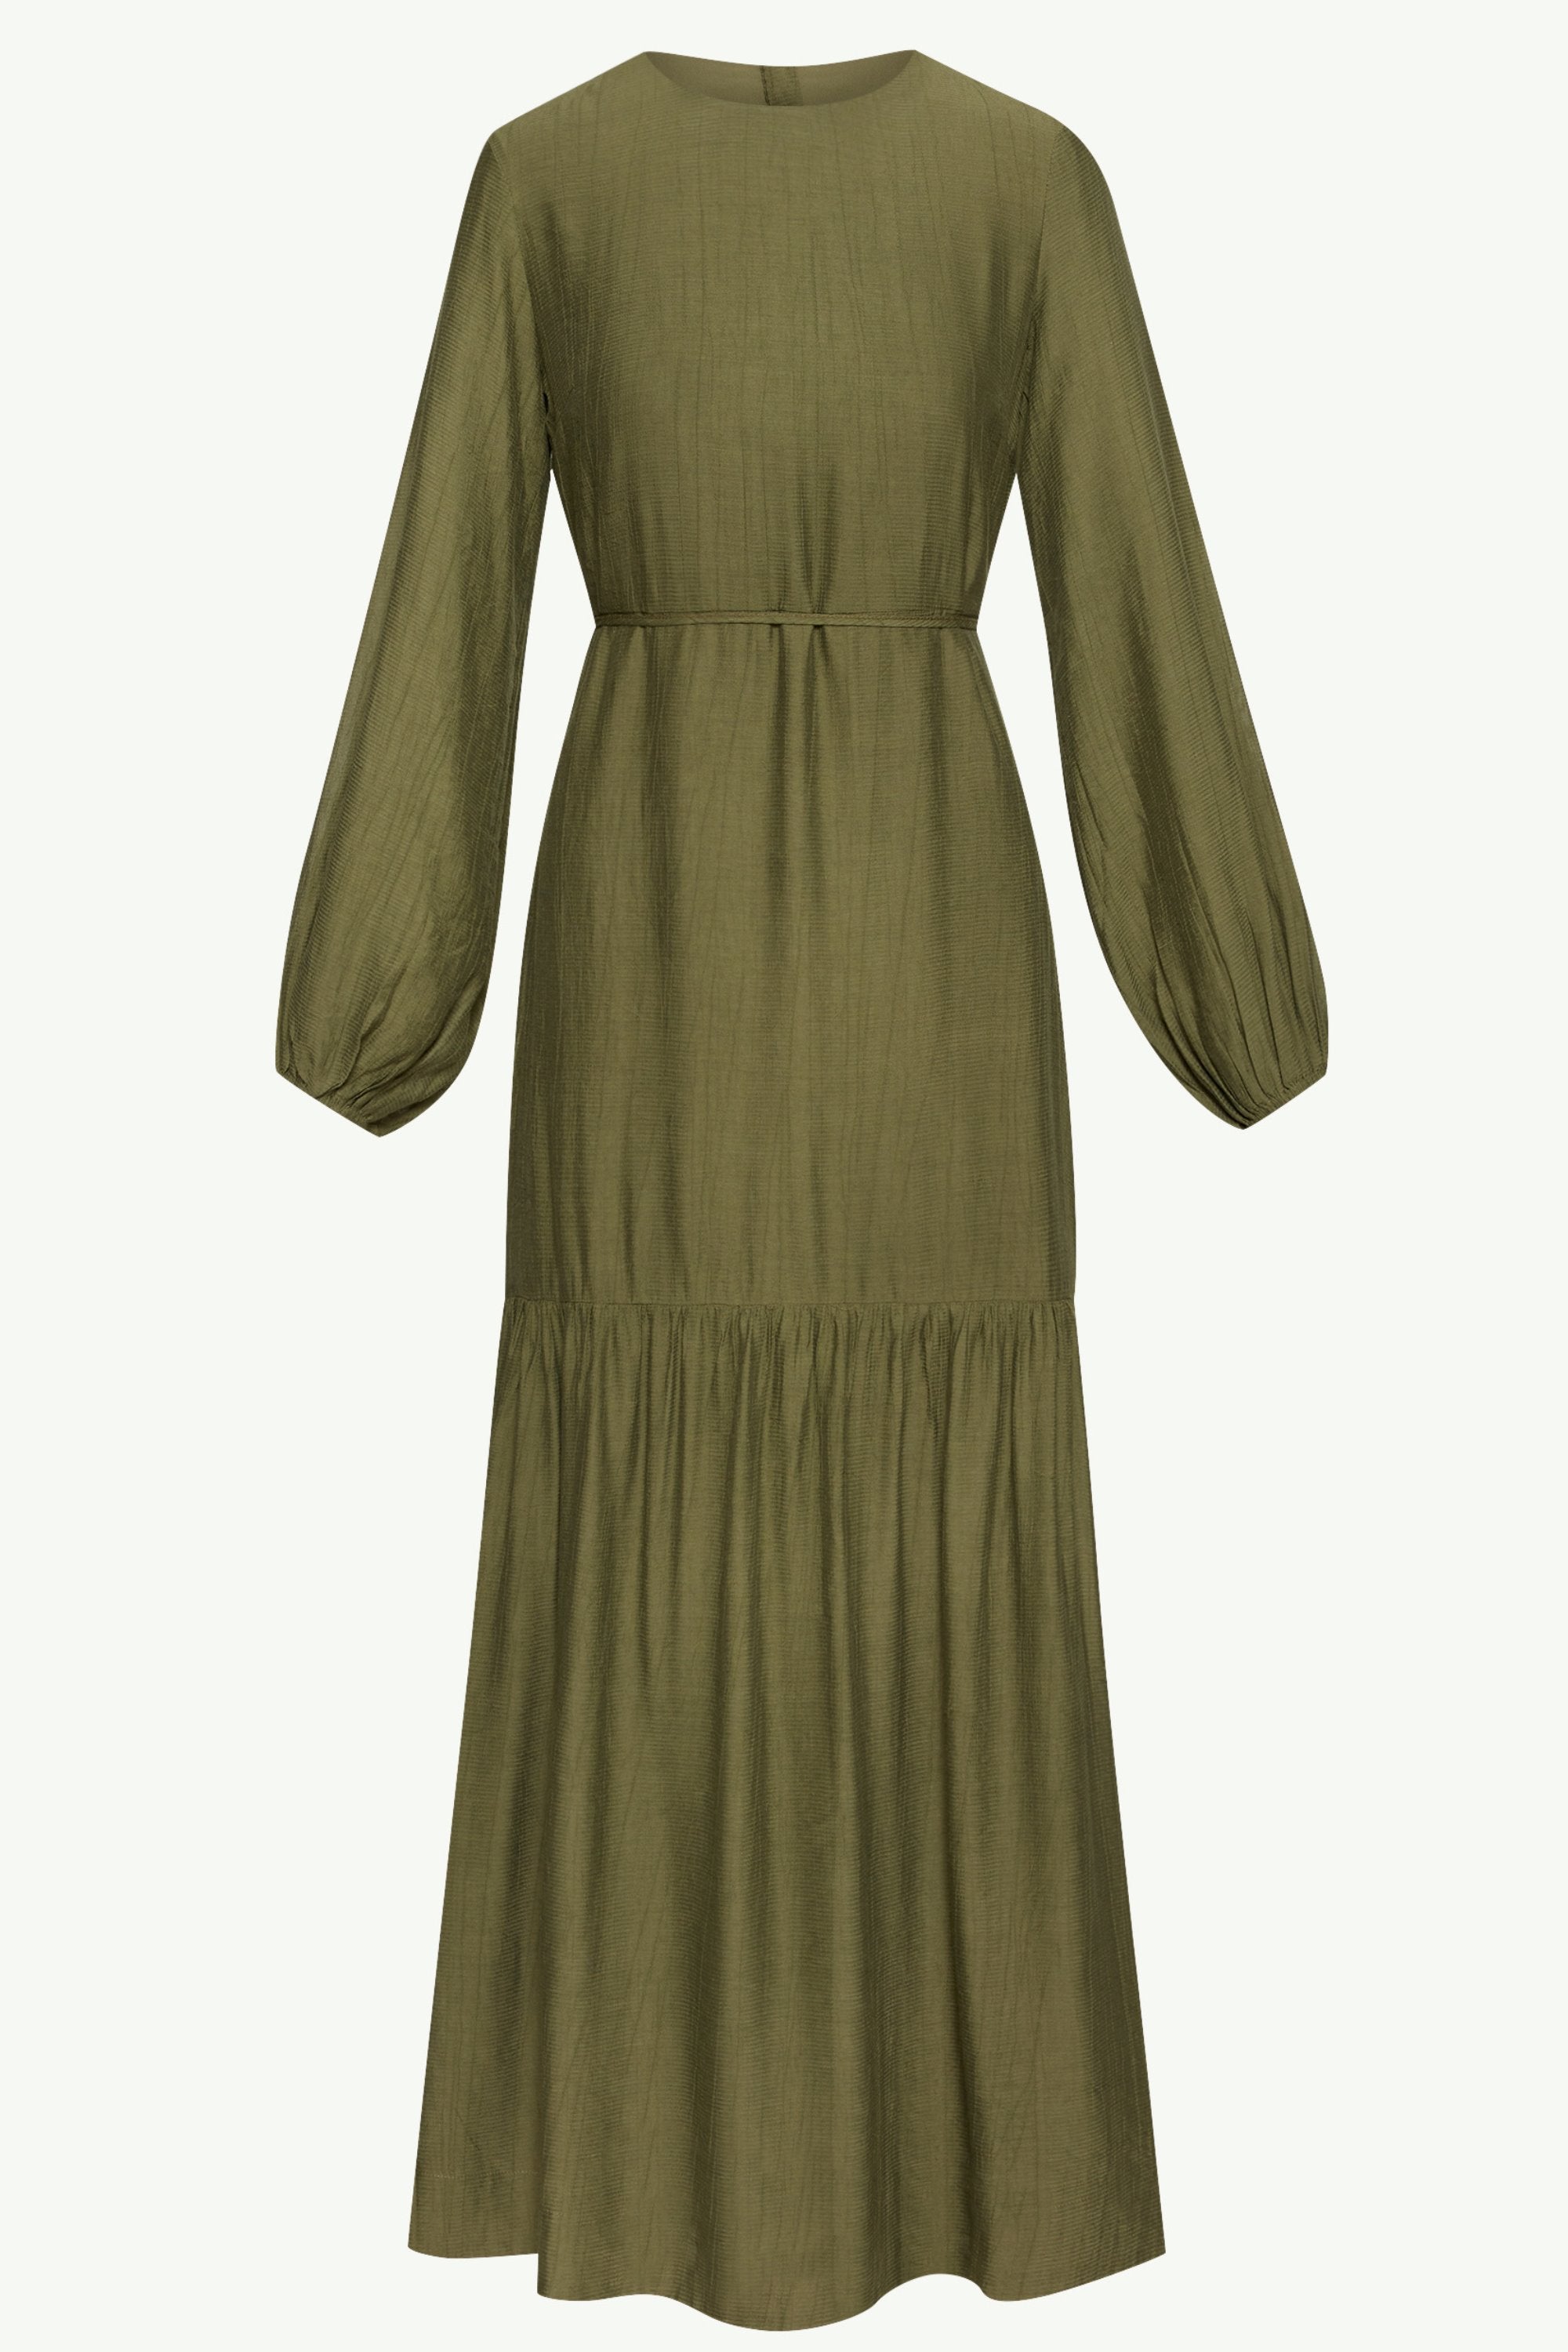 Mila Tiered Maxi Dress - Olive Green Clothing epschoolboard 